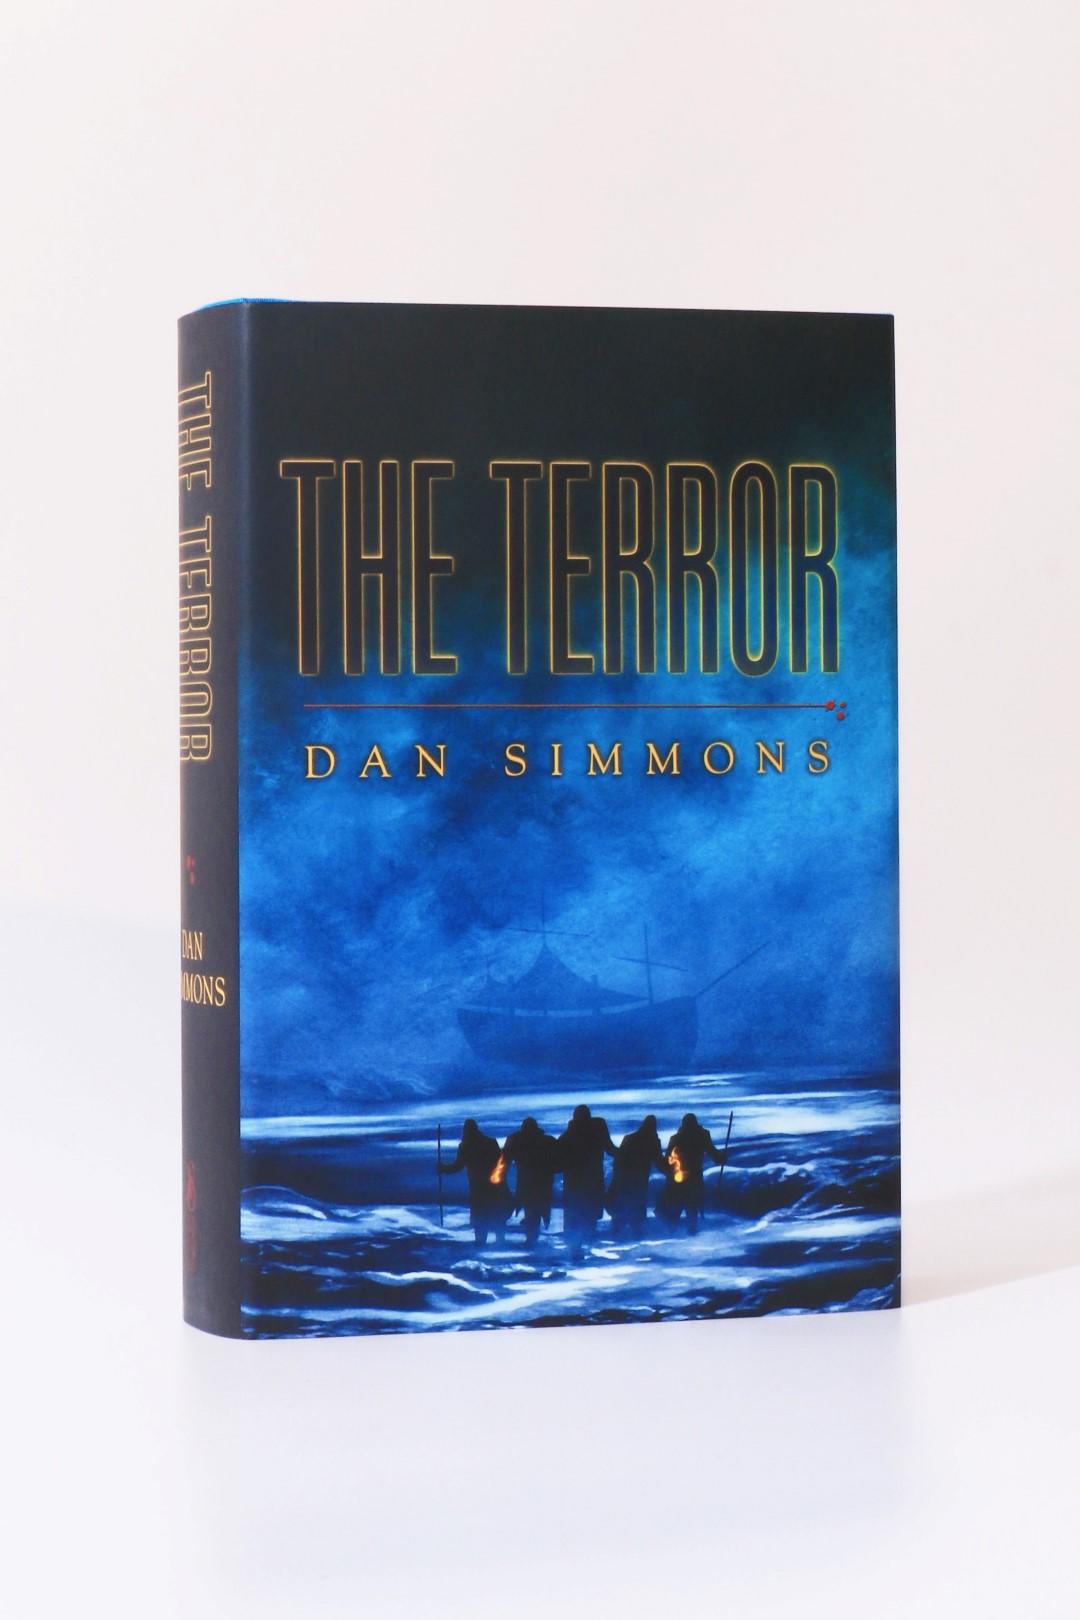 Dan Simmons - The Terror - Subterranean Press, 2009, Signed Limited Edition.